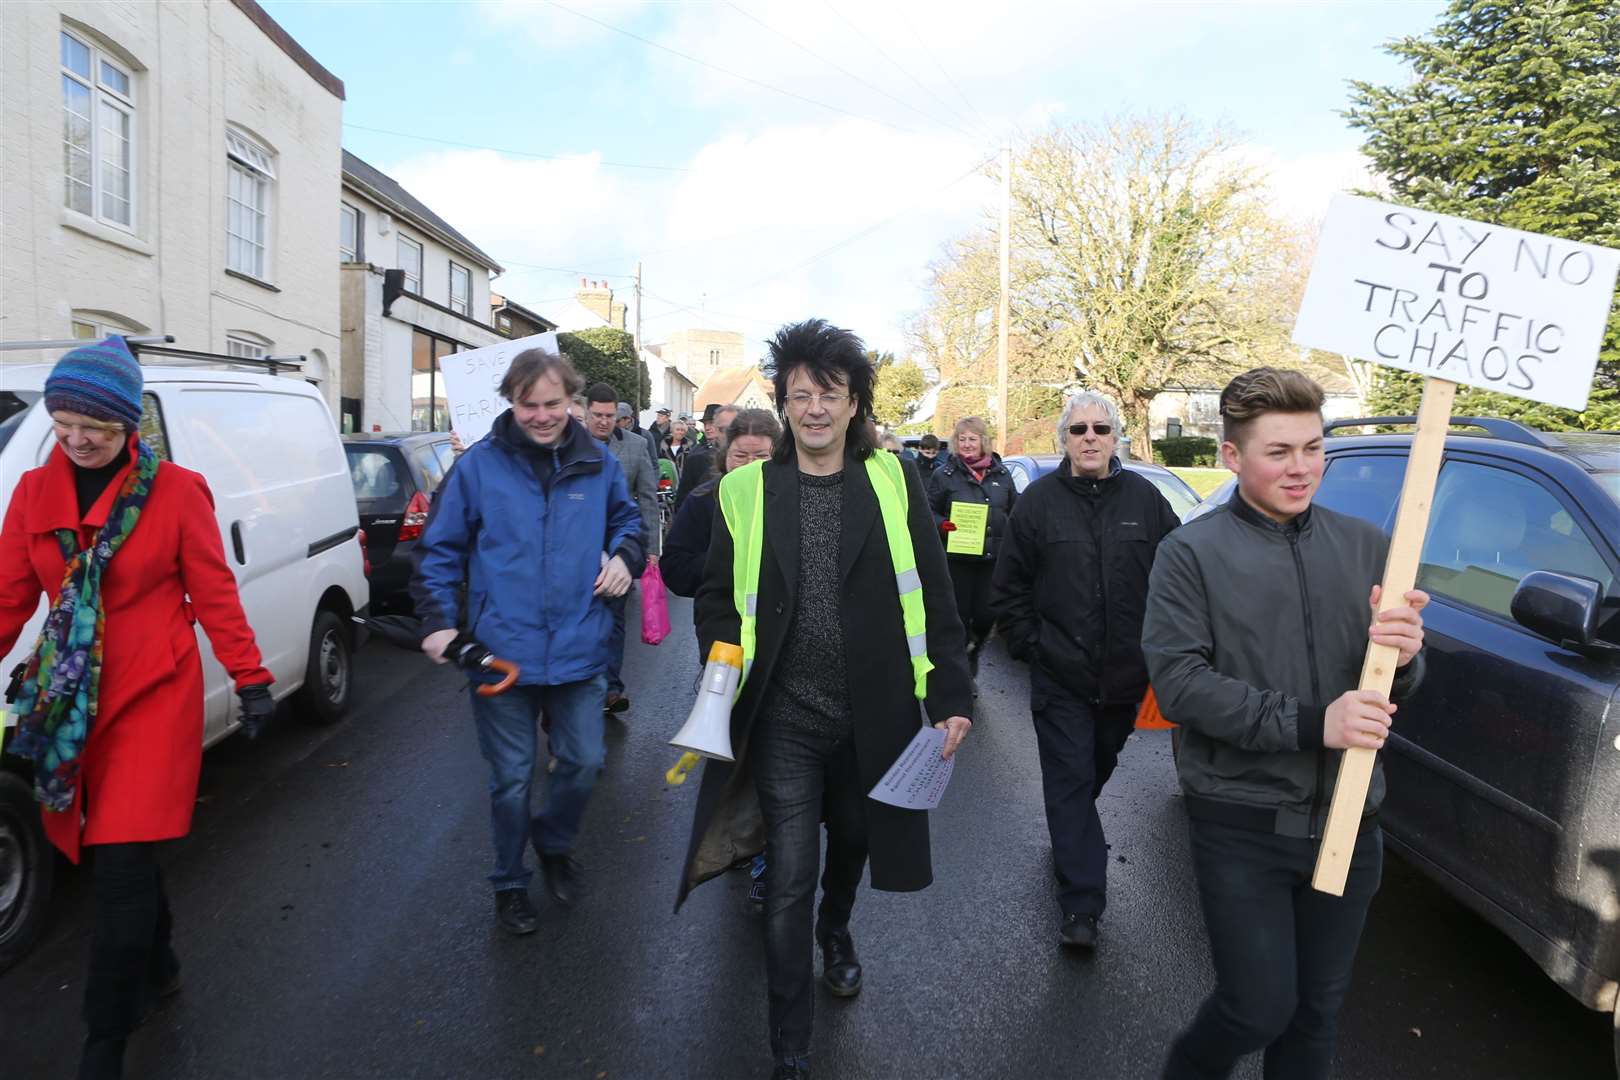 Cllr Mike Baldock with megaphone on a protest march against new houses. Picture: John Westhrop